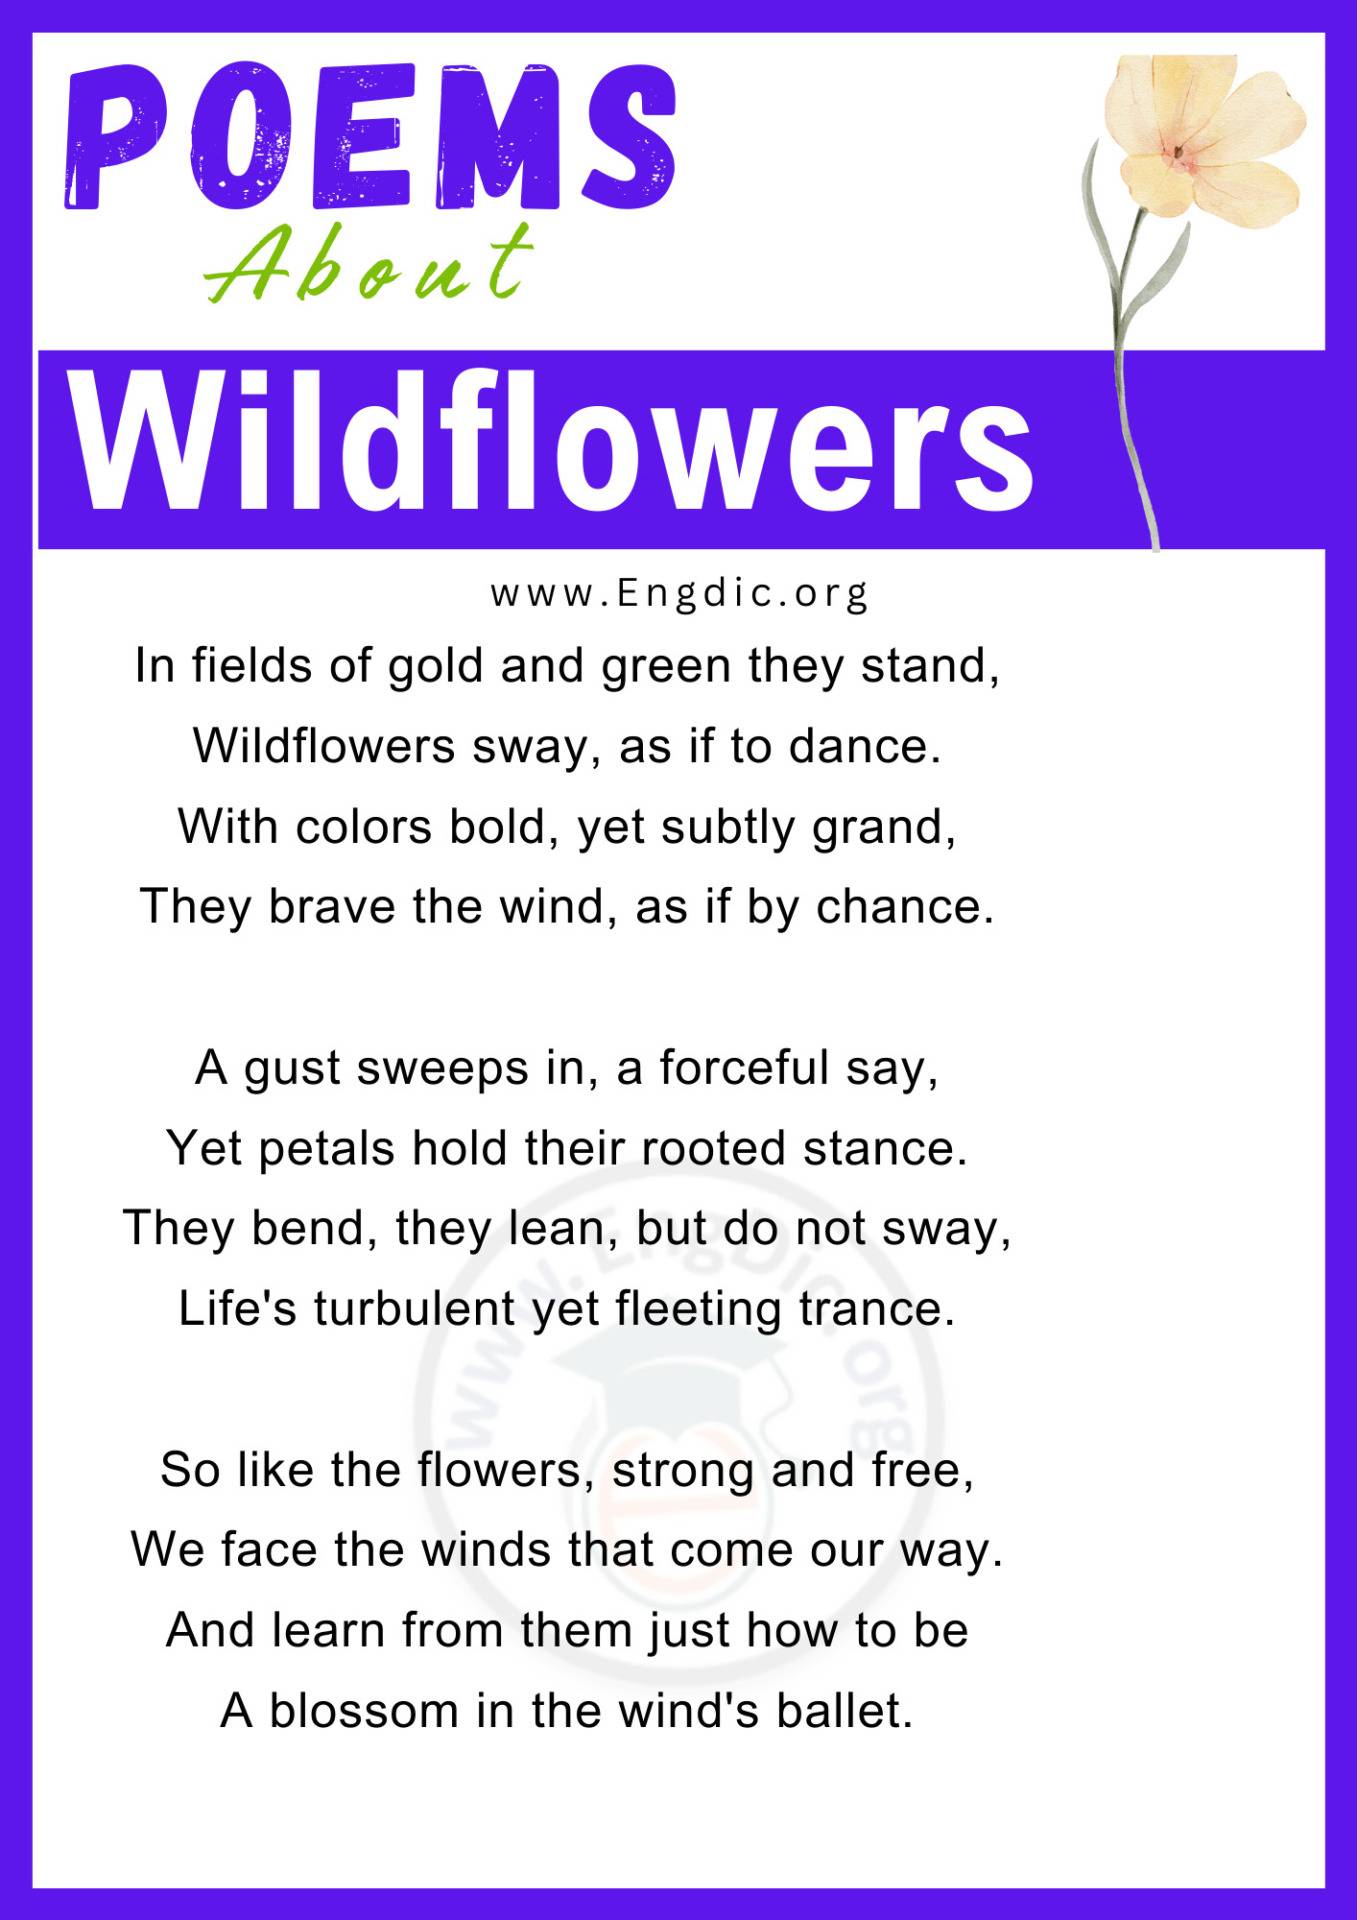 Poems for Wildflowers